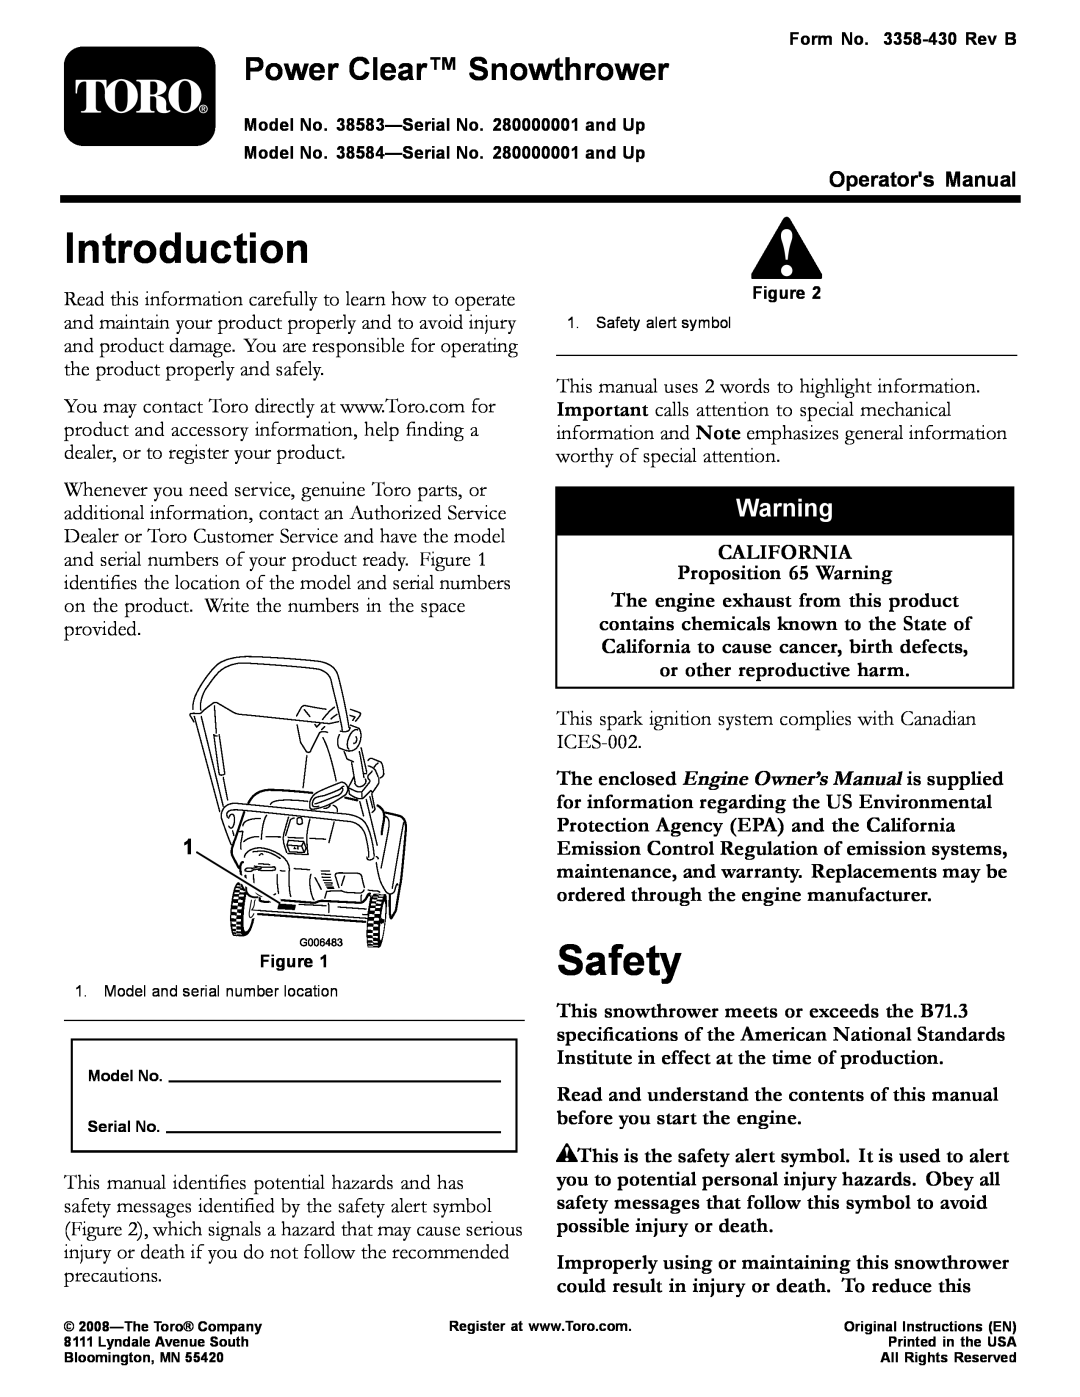 Toro 38583 owner manual Introduction, Safety, Power Clear Snowthrower, Operators Manual, CALIFORNIA Proposition 65 Warning 